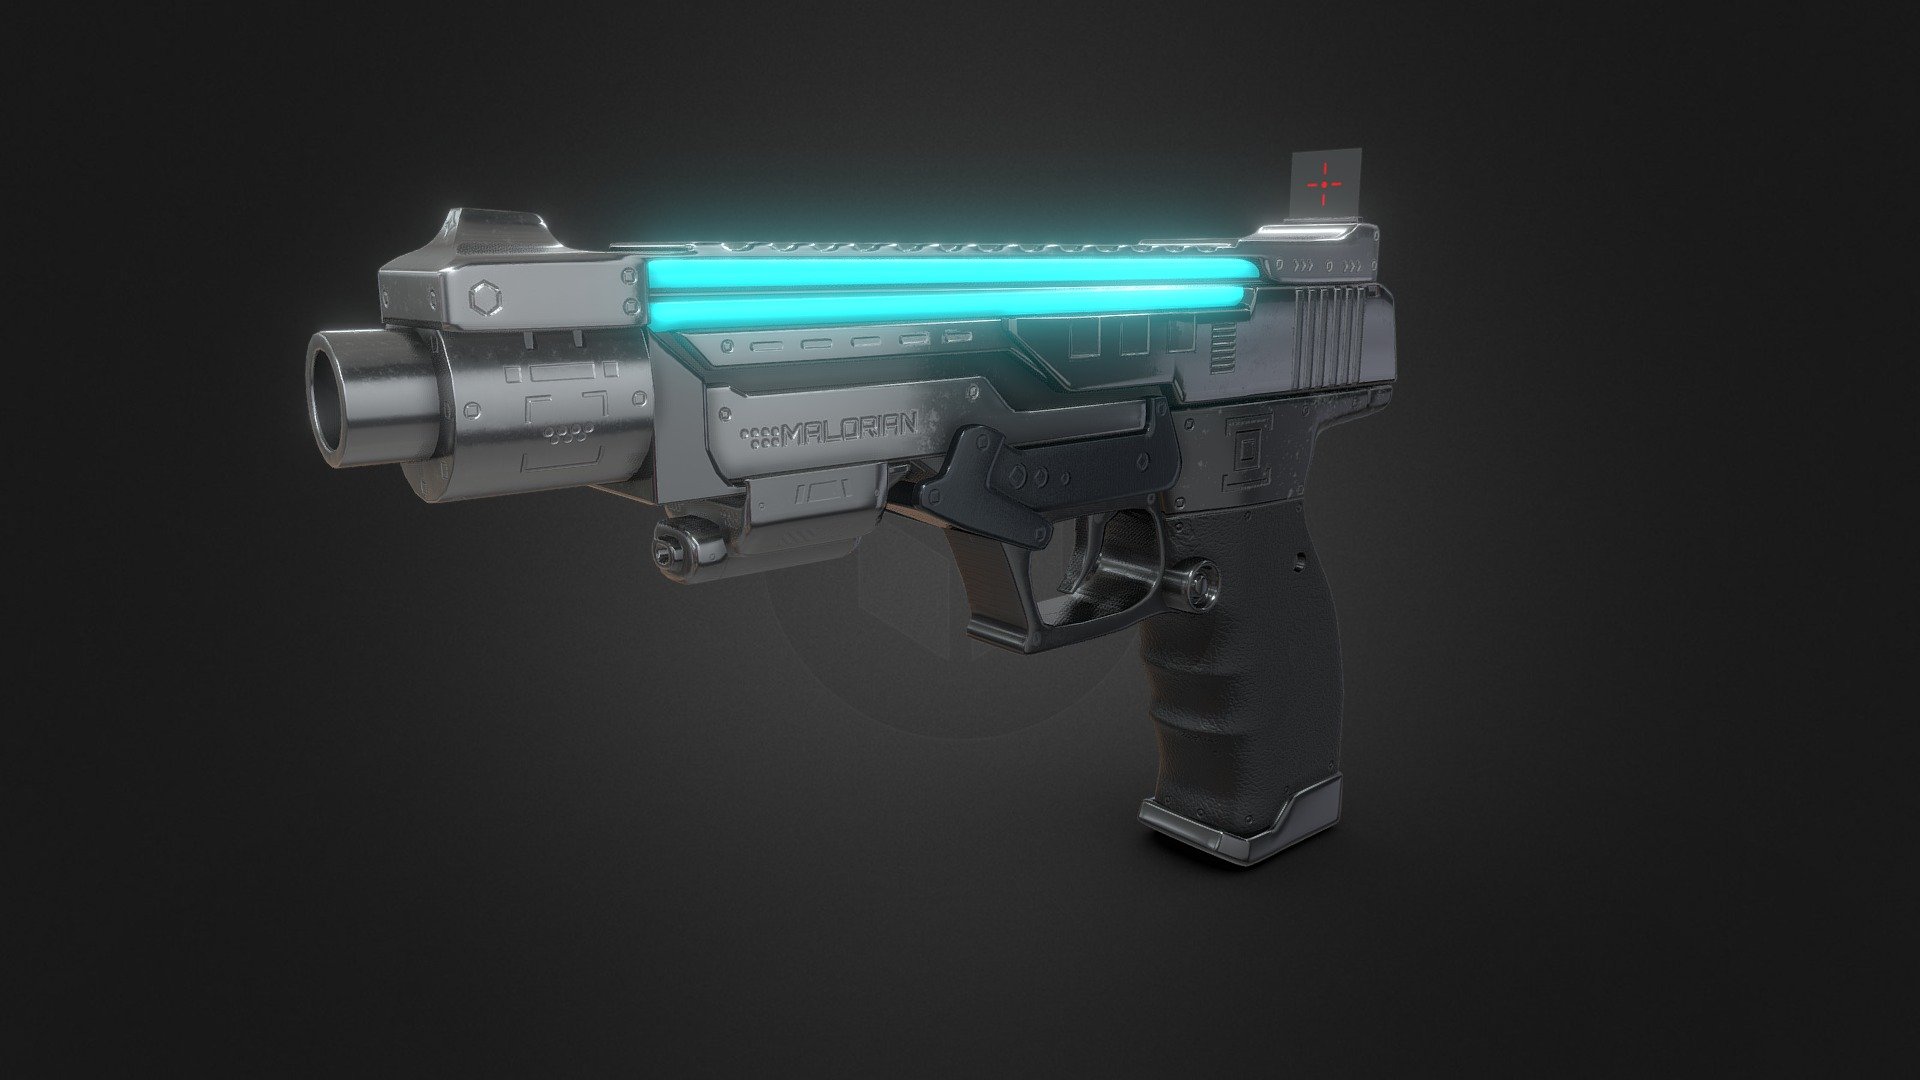 Inspired by Cyberpunk 2077 game I made this gun concept, based on ingame weapon Malorial 3516. (High-poly)
Made with Maya 2024 and textured with Substance Painter.
Feel free to use it 3d model